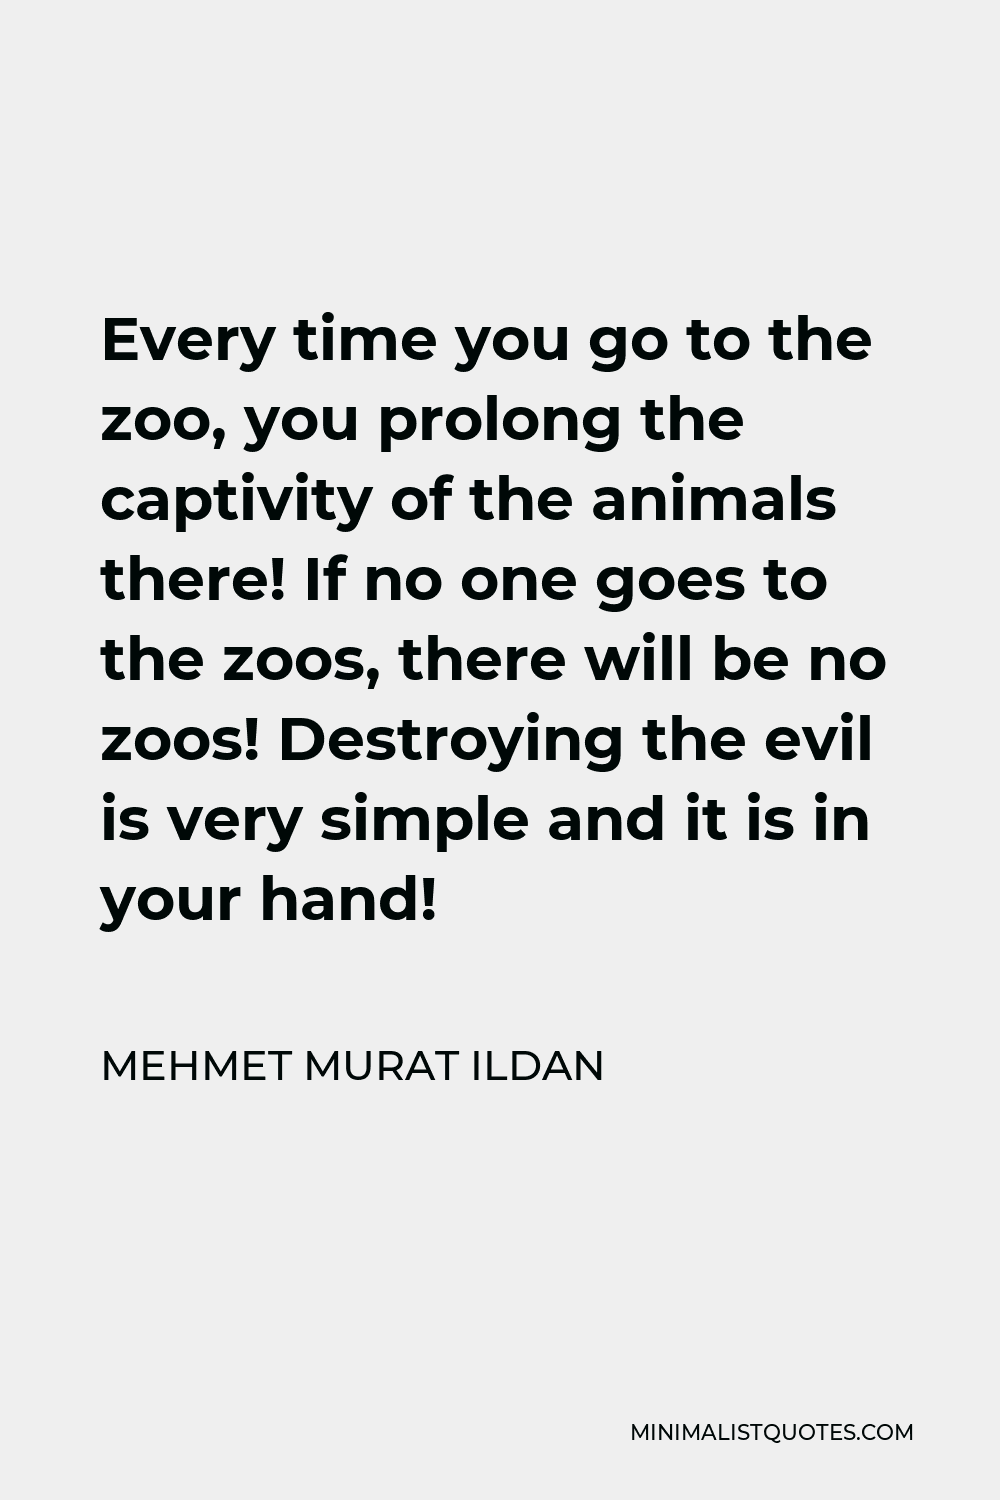 Mehmet Murat Ildan Quote - Every time you go to the zoo, you prolong the captivity of the animals there! If no one goes to the zoos, there will be no zoos! Destroying the evil is very simple and it is in your hand!